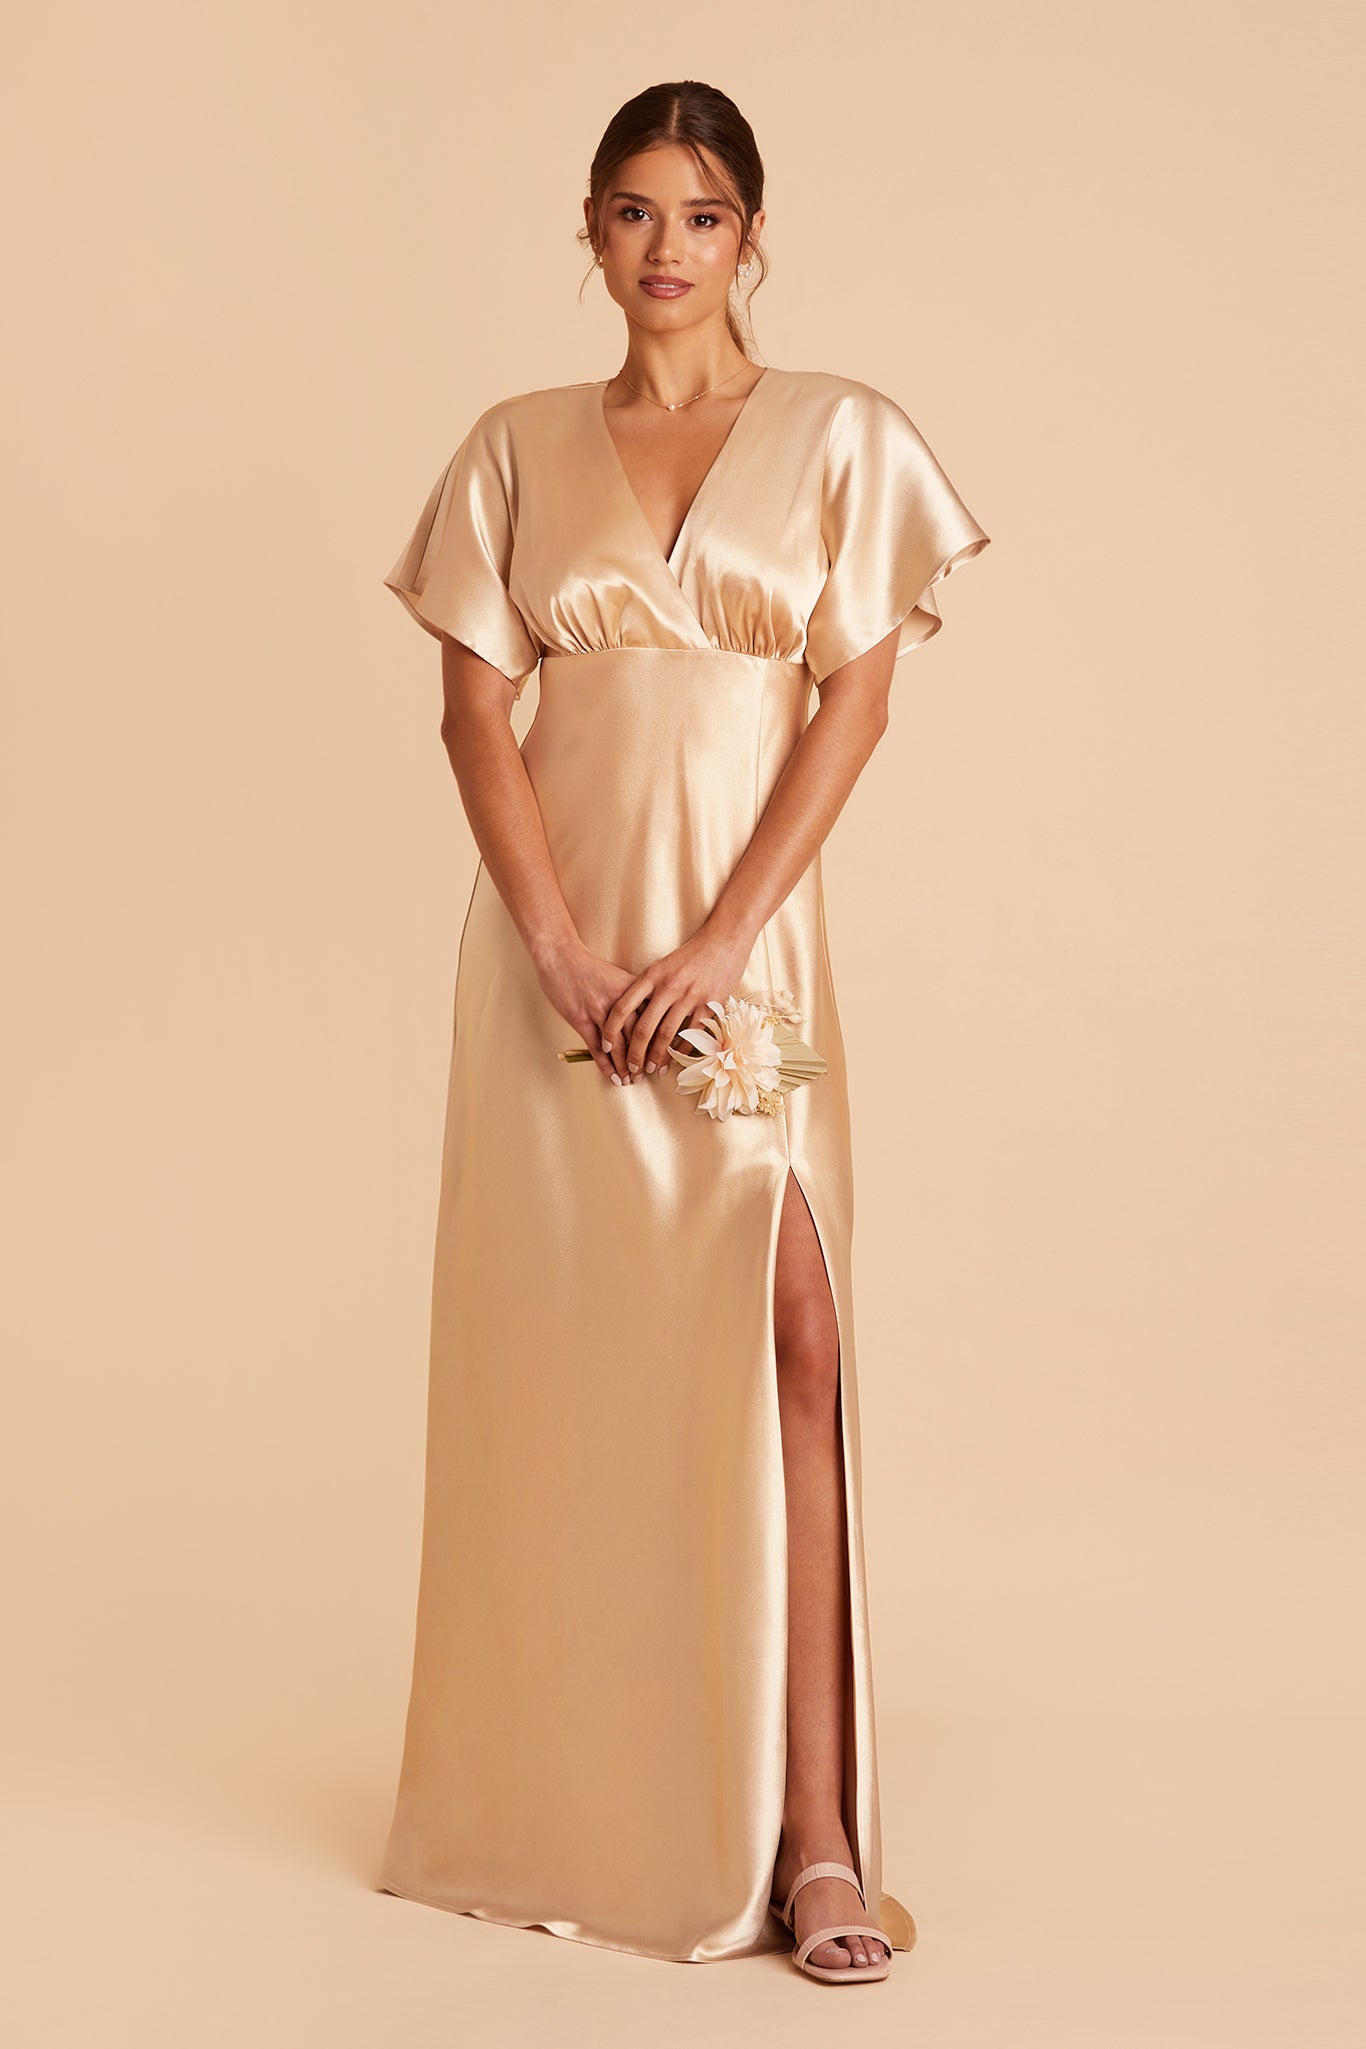 Jesse Satin Dress in gold satin by Birdy Grey, front view